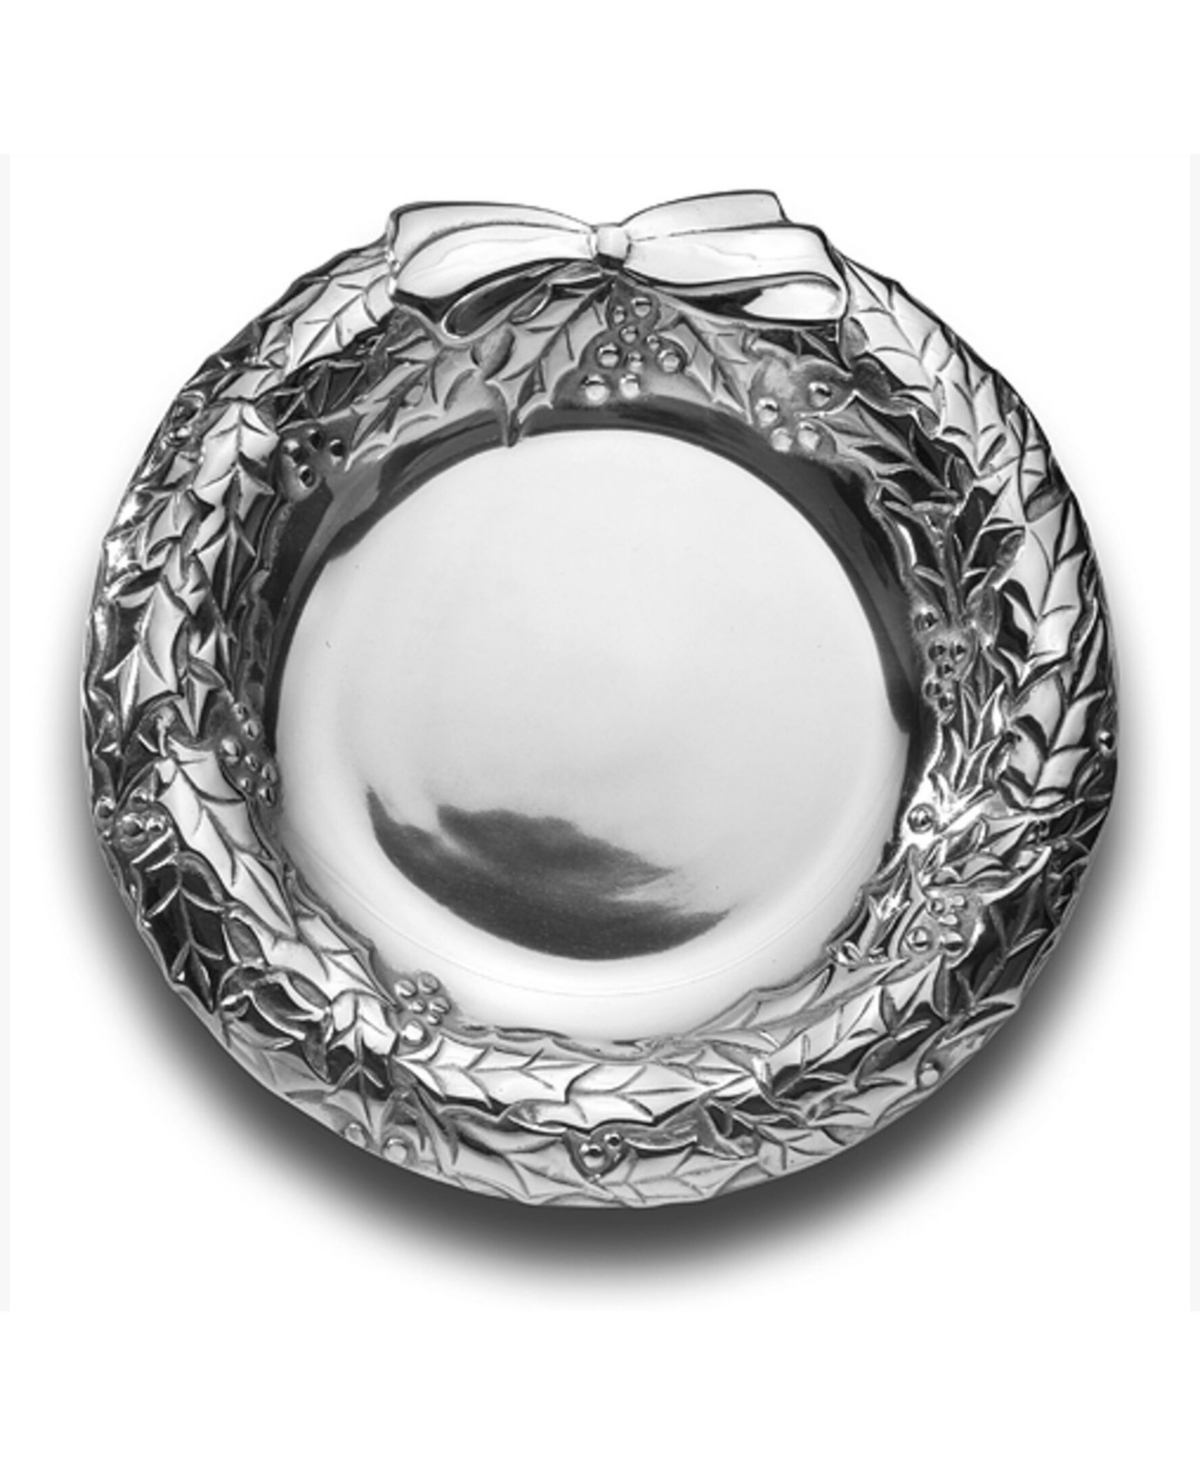 Wilton Armetale Holly Berries Round Wreath Tray In Silver